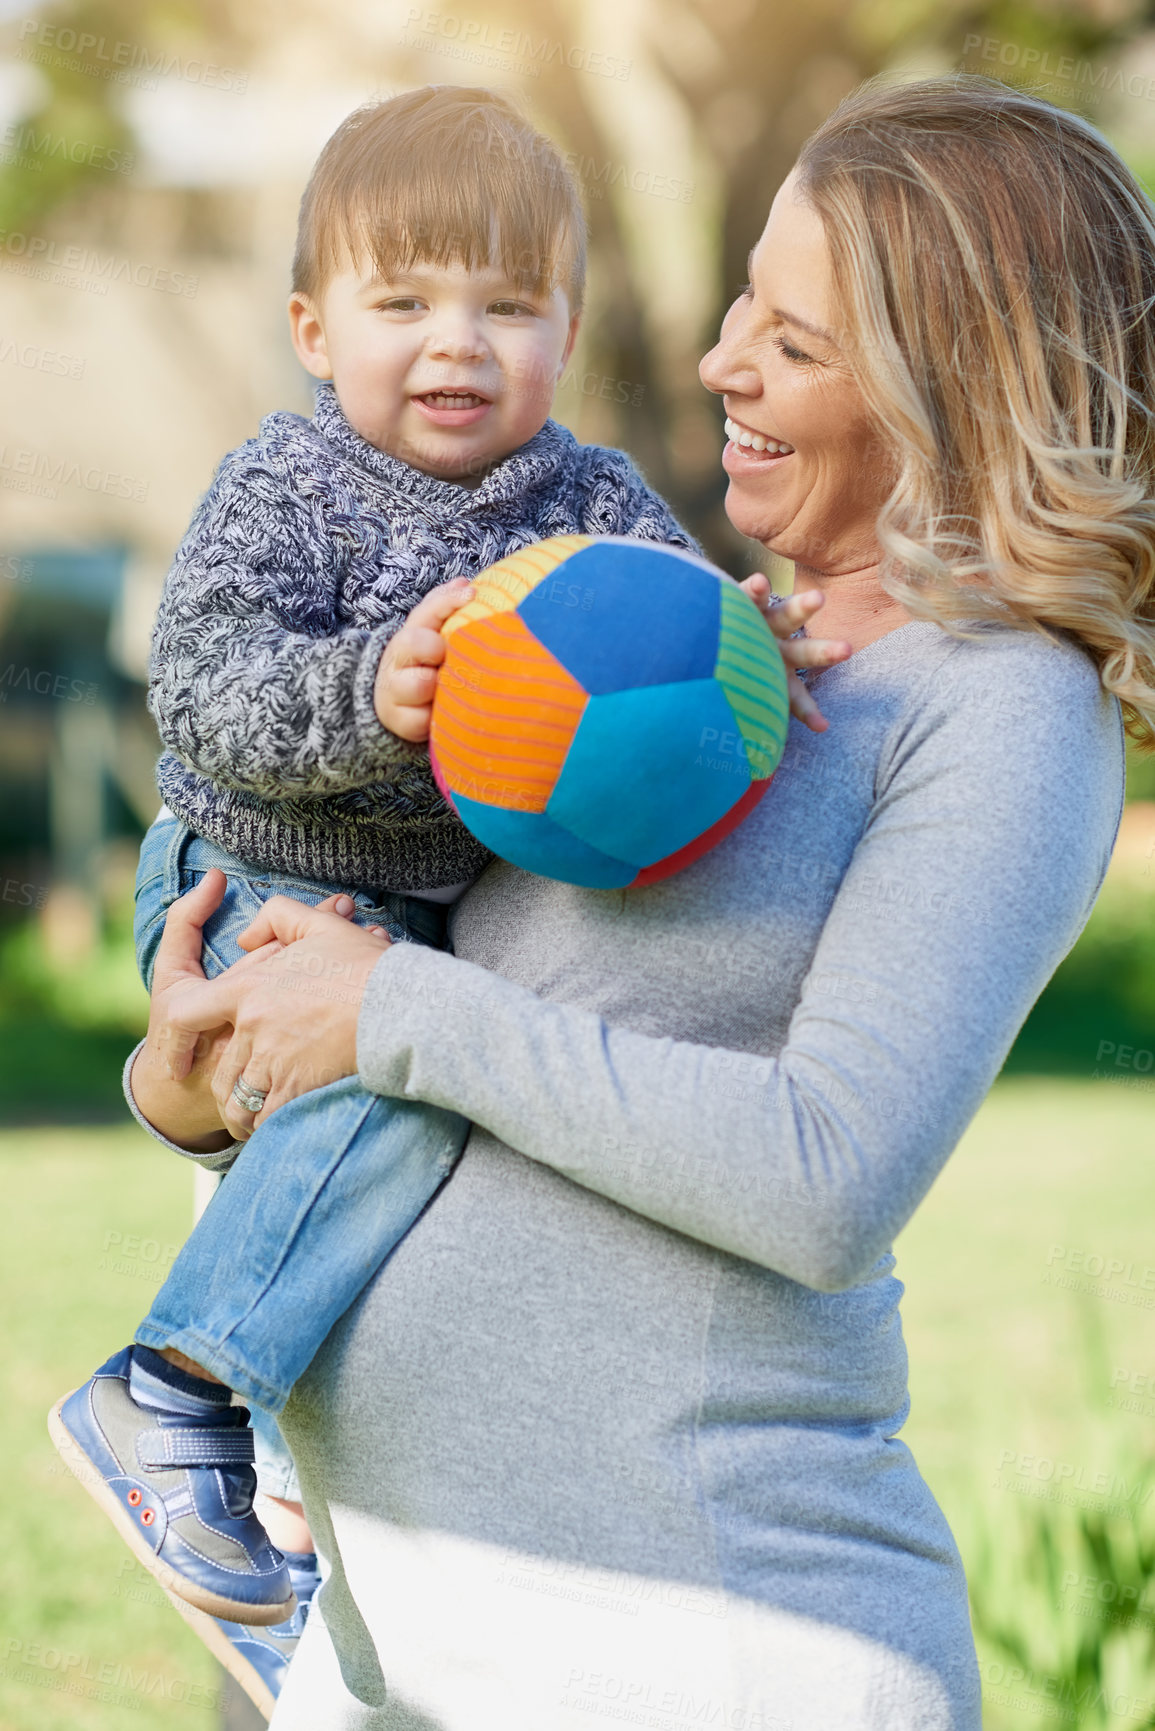 Buy stock photo Cropped shot of a mother bonding with her little boy outside